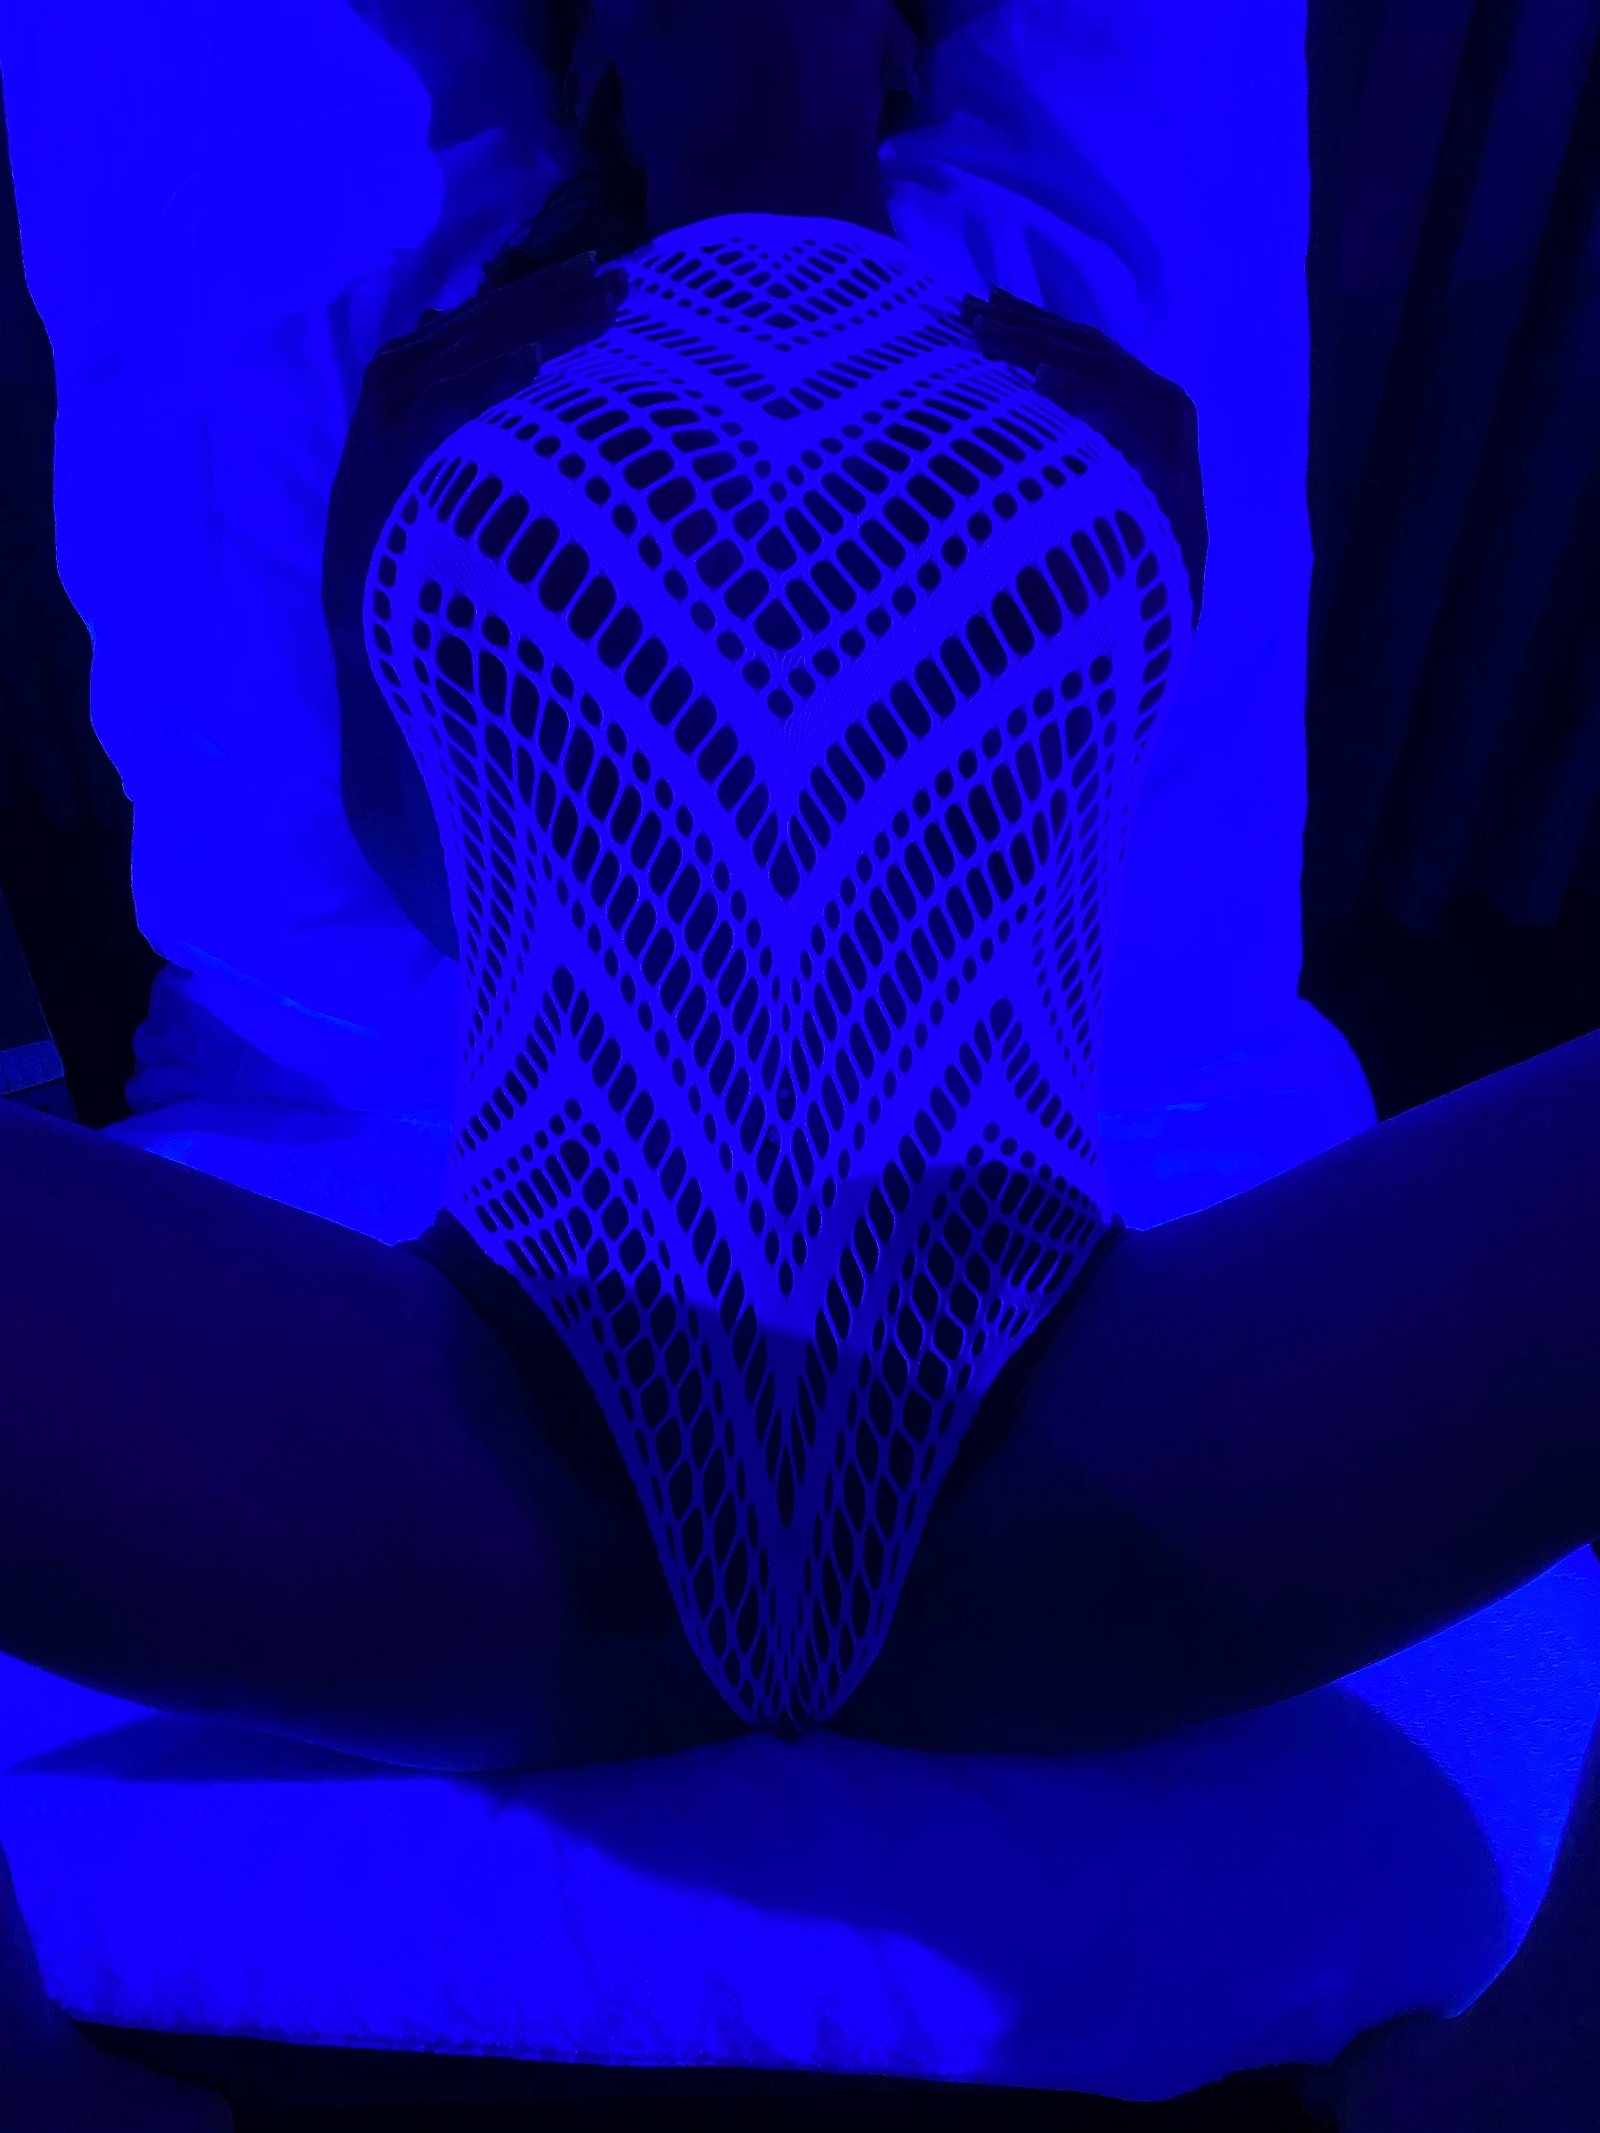 Photo by Takeflight3 with the username @Takeflight3, who is a verified user,  January 15, 2020 at 5:06 AM and the text says 'Bathed in blacklight...the one and only @batgirlskg. I mean...uh damn. My girlfriend is a fucking unicorn'